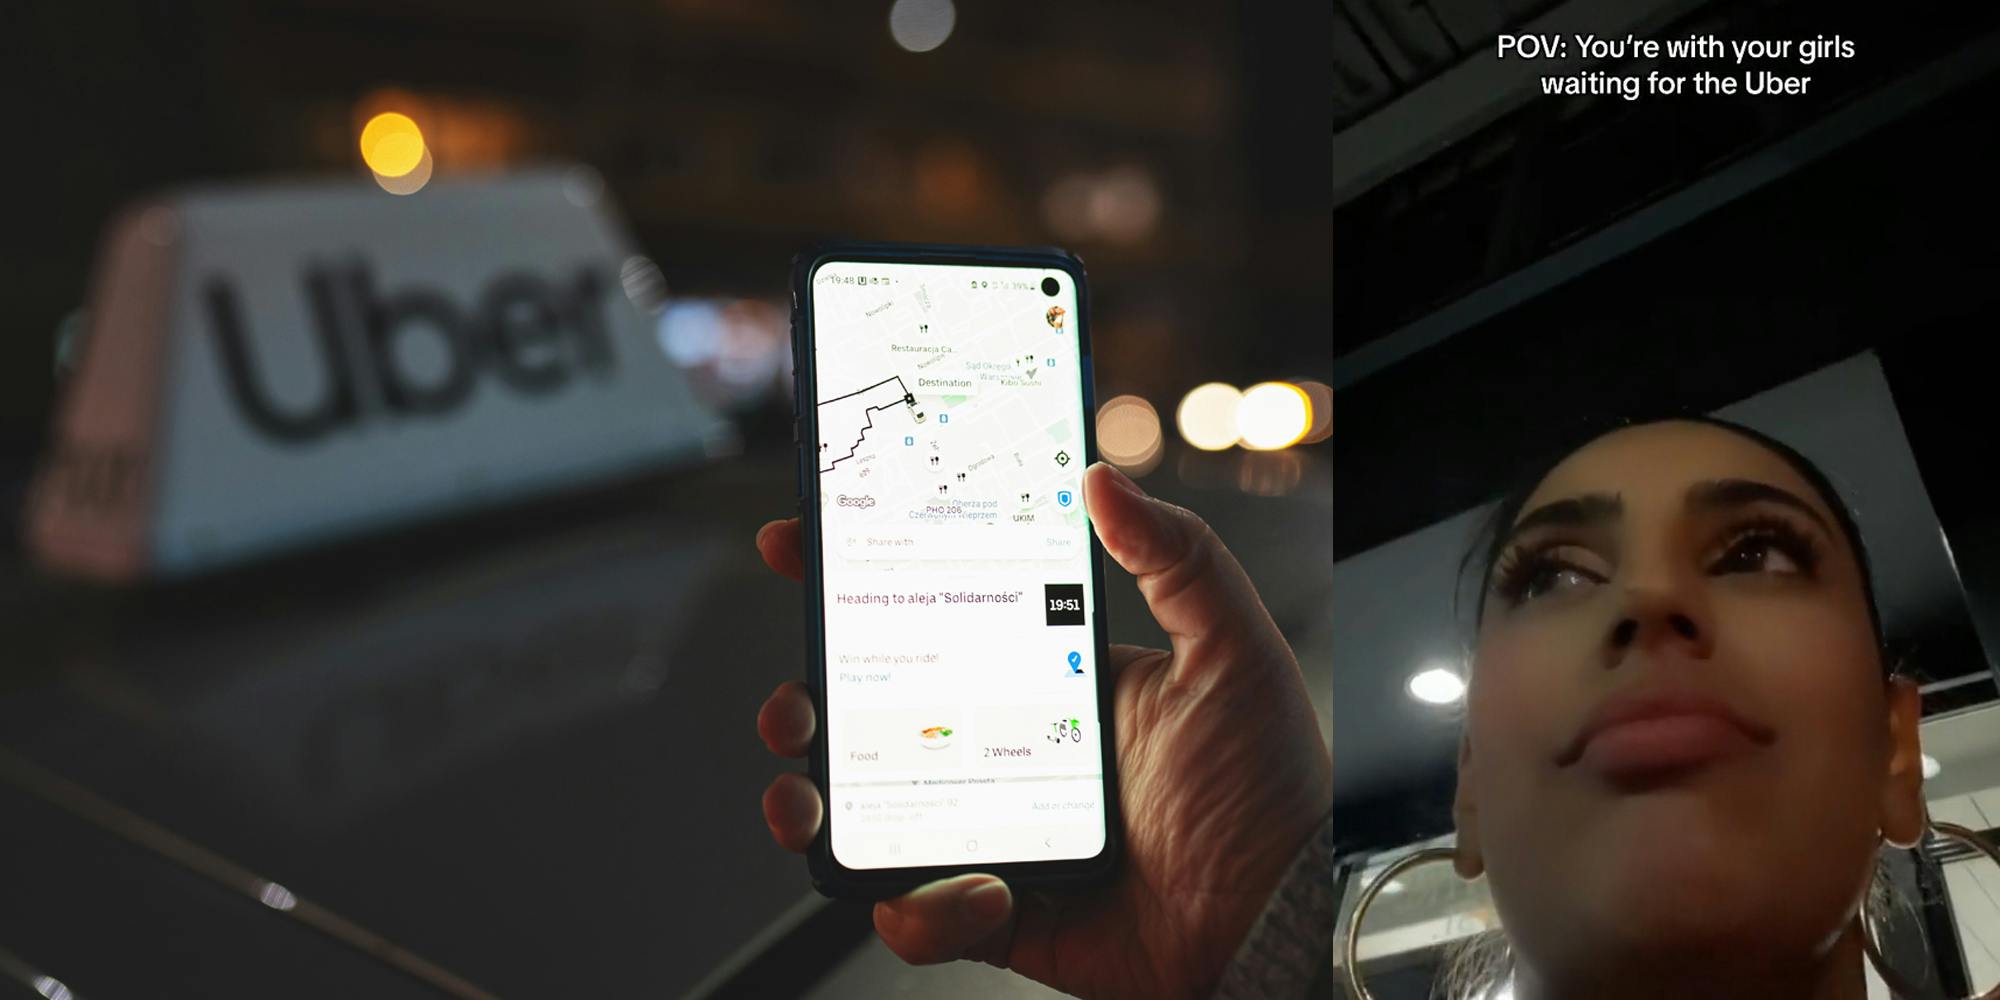 hand holding phone with Uber on map in front of car with Uber logo on top (l) woman outside with caption "POV: You're with your girls waiting for the Uber" (r)